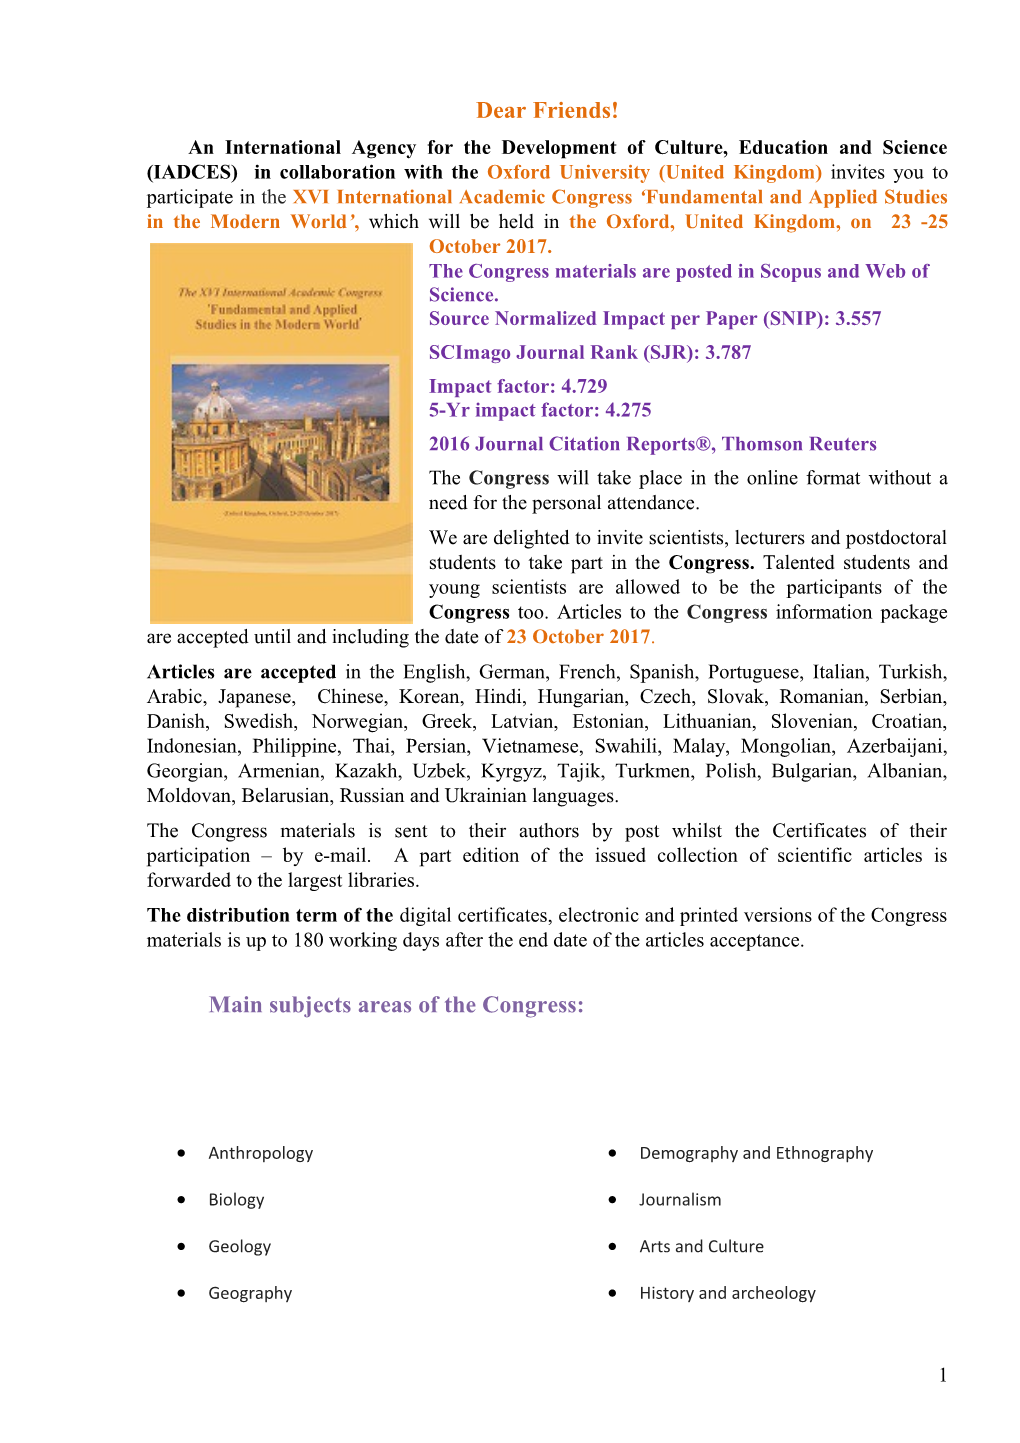 The Congress Materials Are Posted in Scopus and Web of Science